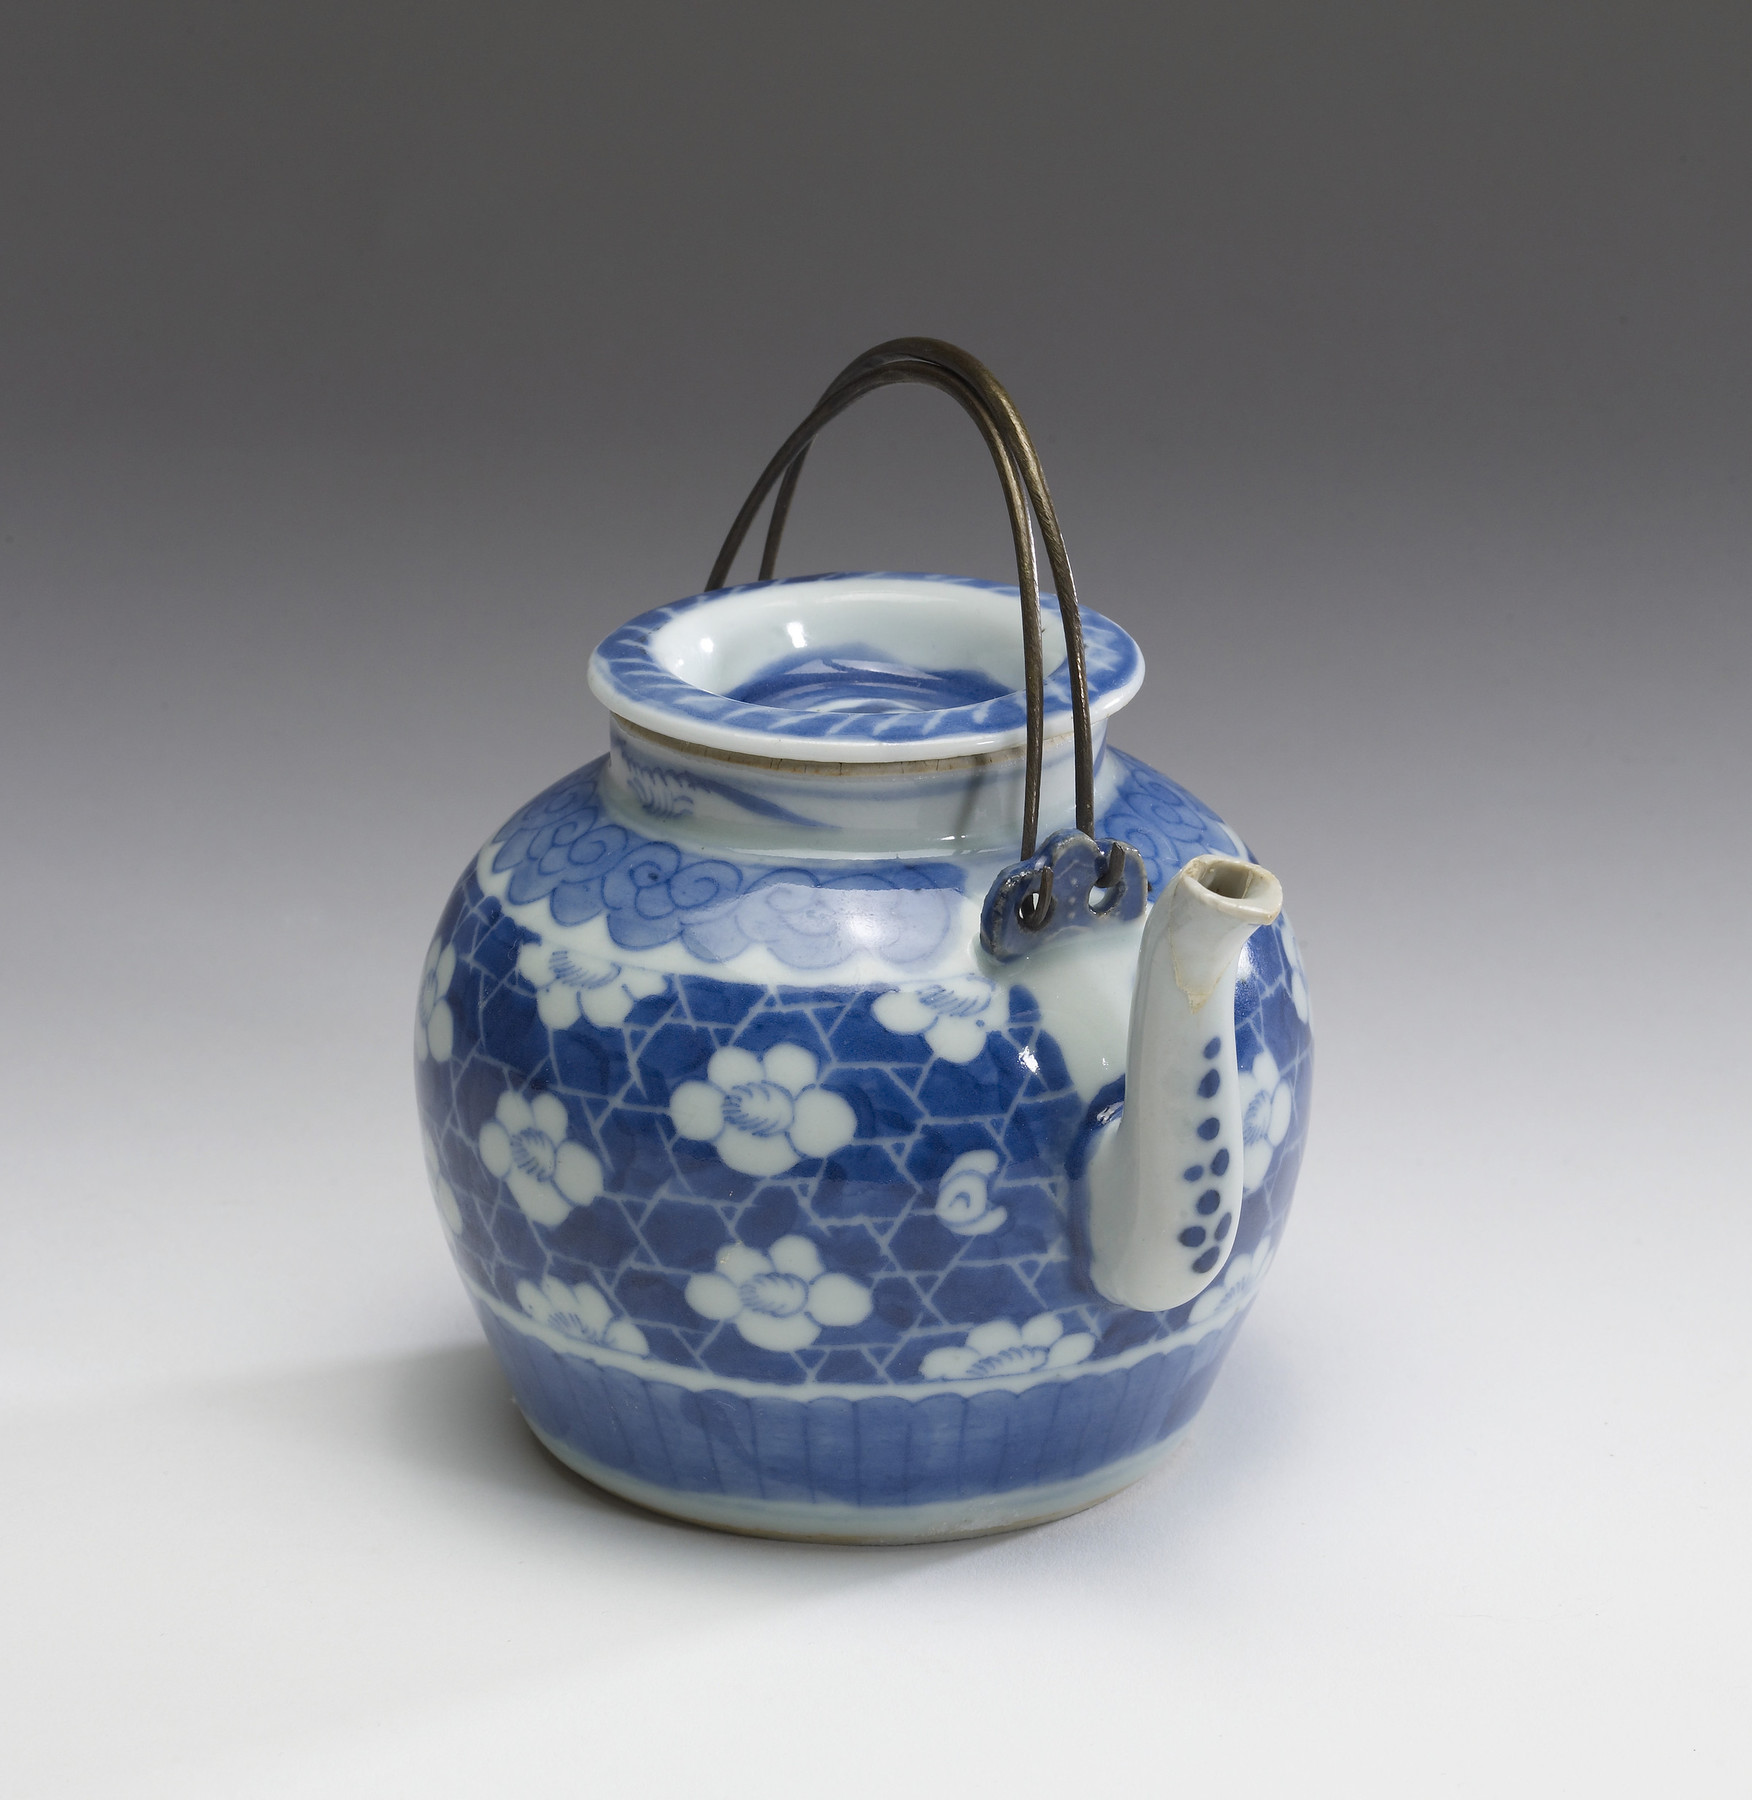 Image for Teapot with Plum Blossoms and Geometric Designs